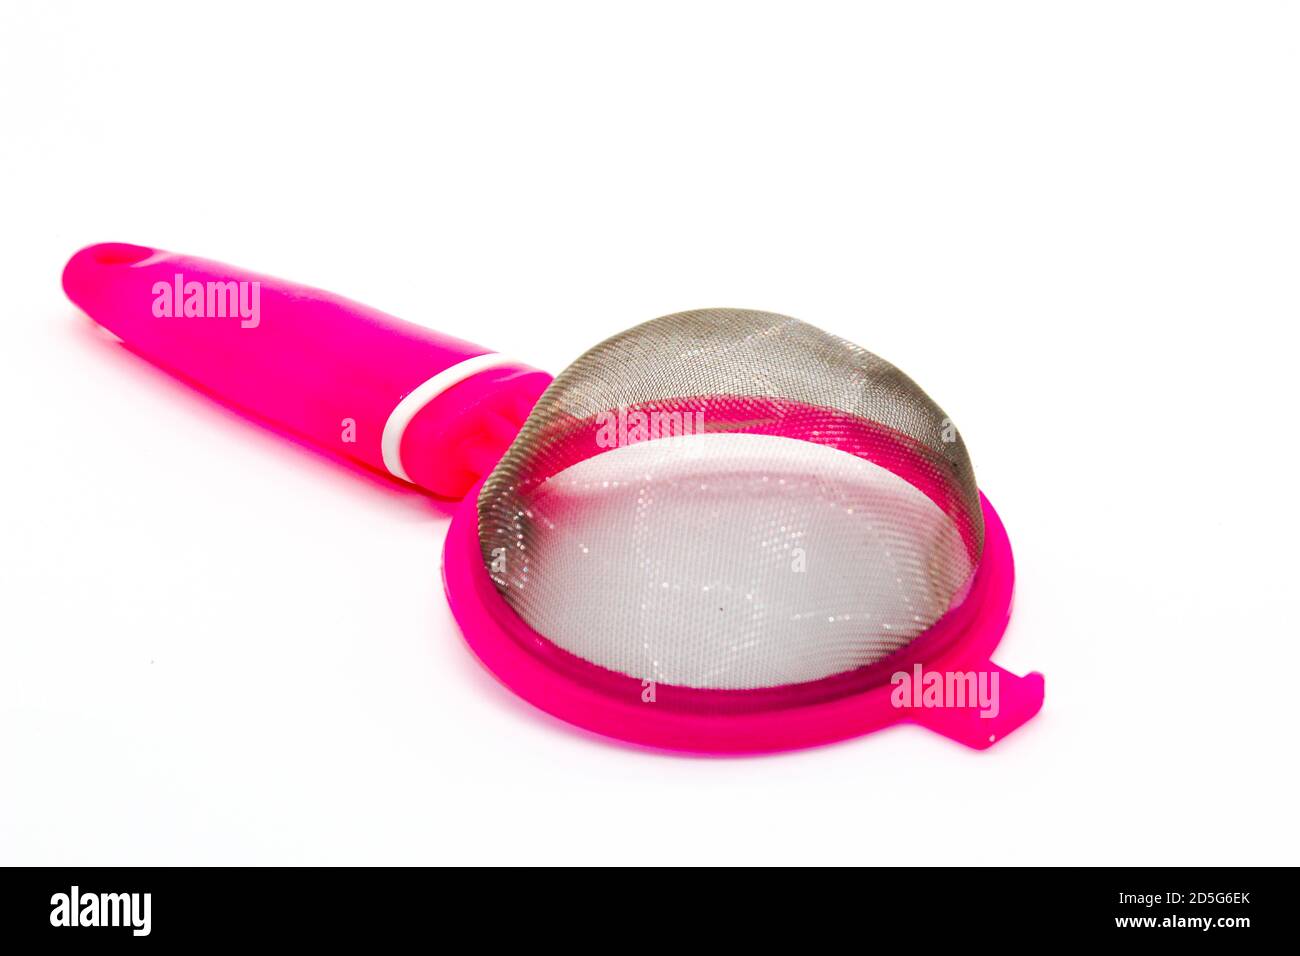 A picture of Tea Strainer on white background Stock Photo